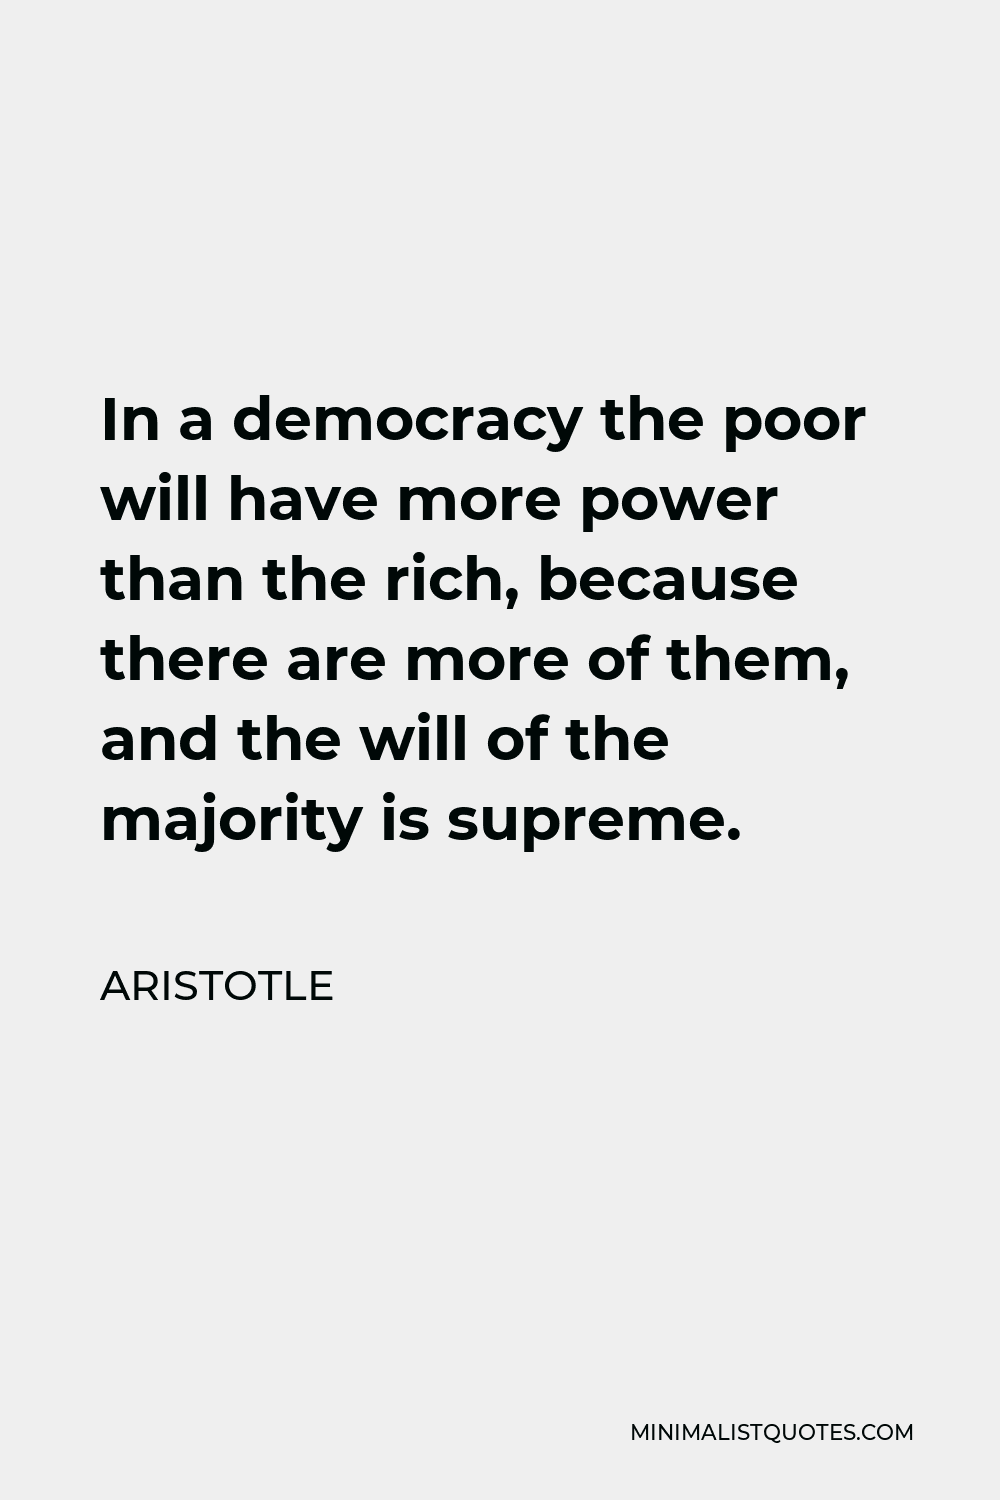 Aristotle Quote - In a democracy the poor will have more power than the rich, because there are more of them, and the will of the majority is supreme.